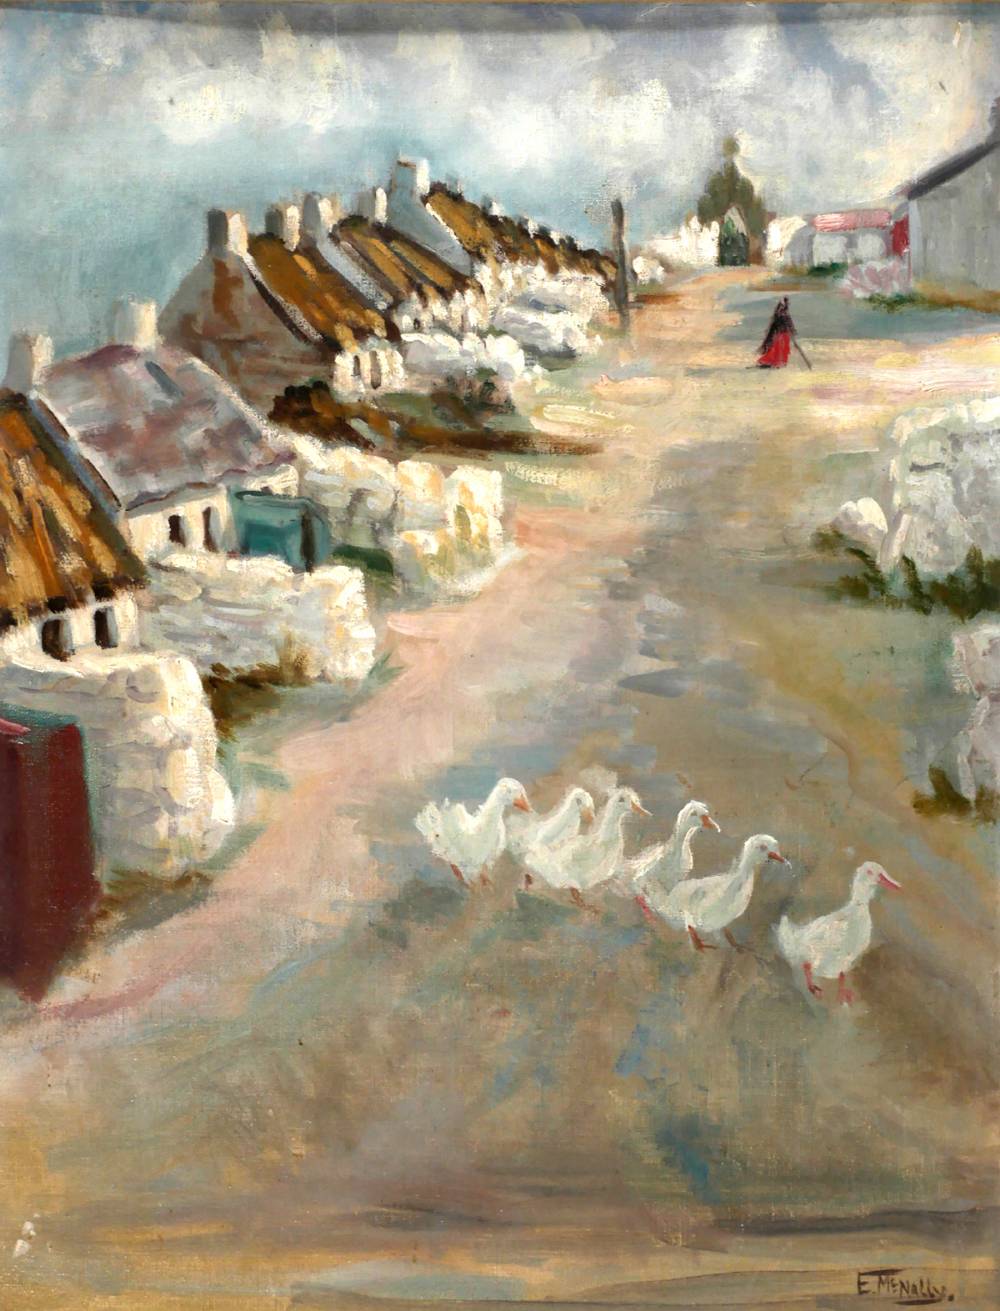 DUCKS AND COTTAGES, WEST OF IRELAND by Eithne McNally (1910-1996) (1910-1996) at Whyte's Auctions